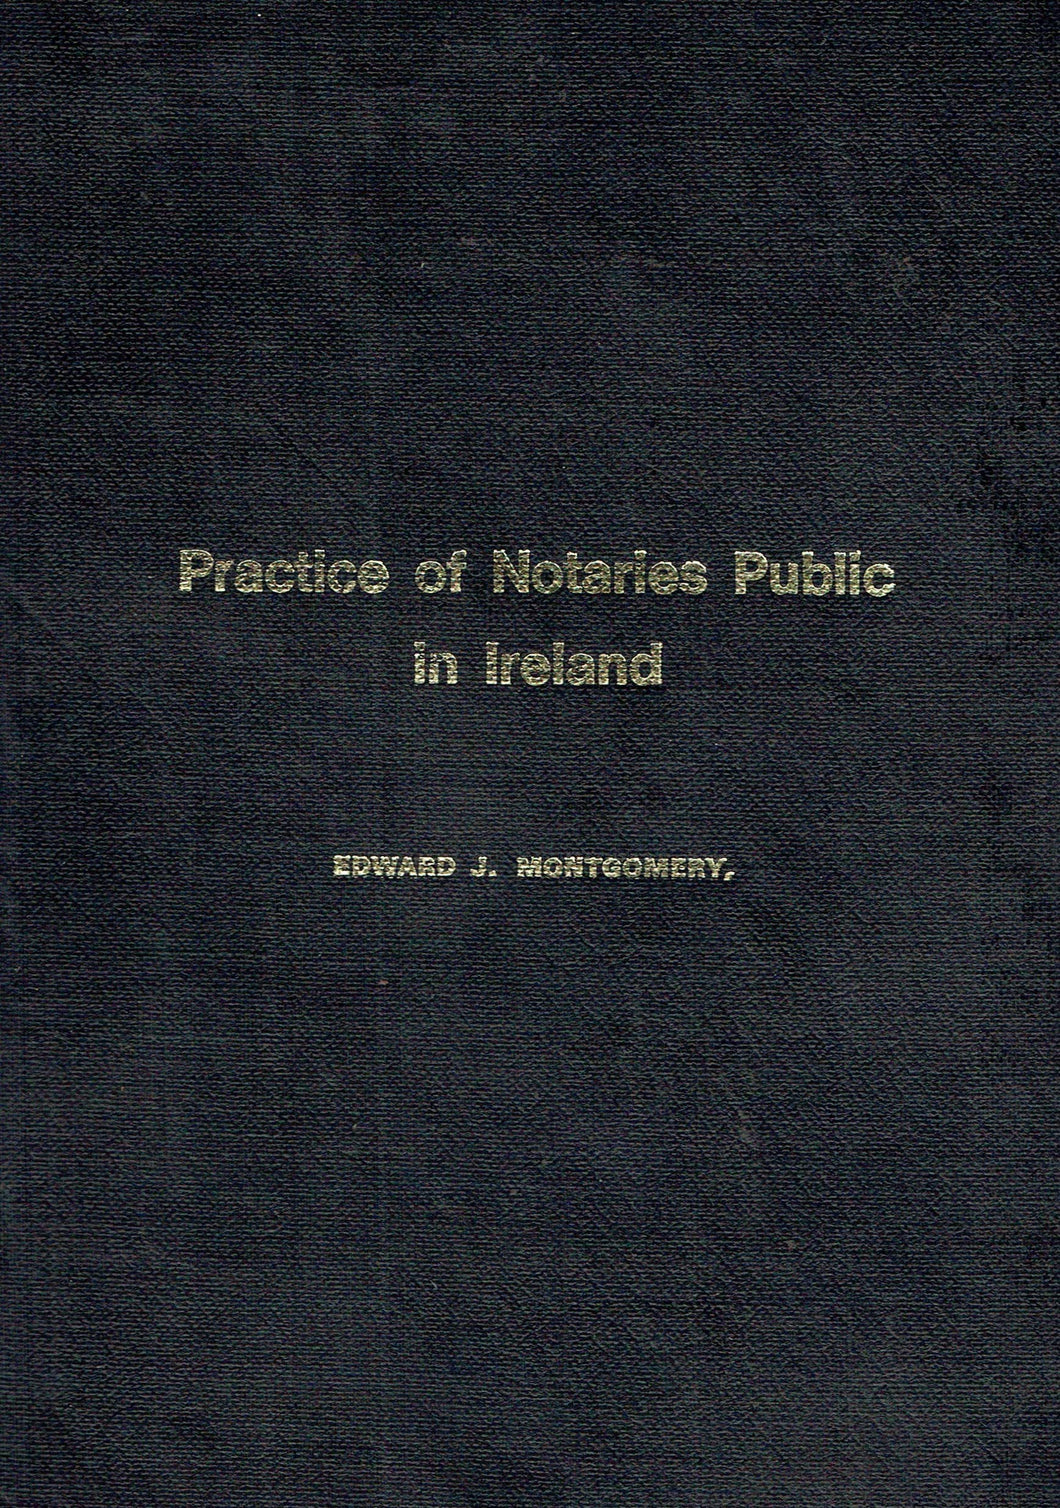 Manual on the Practice of Notaries Public in Ireland